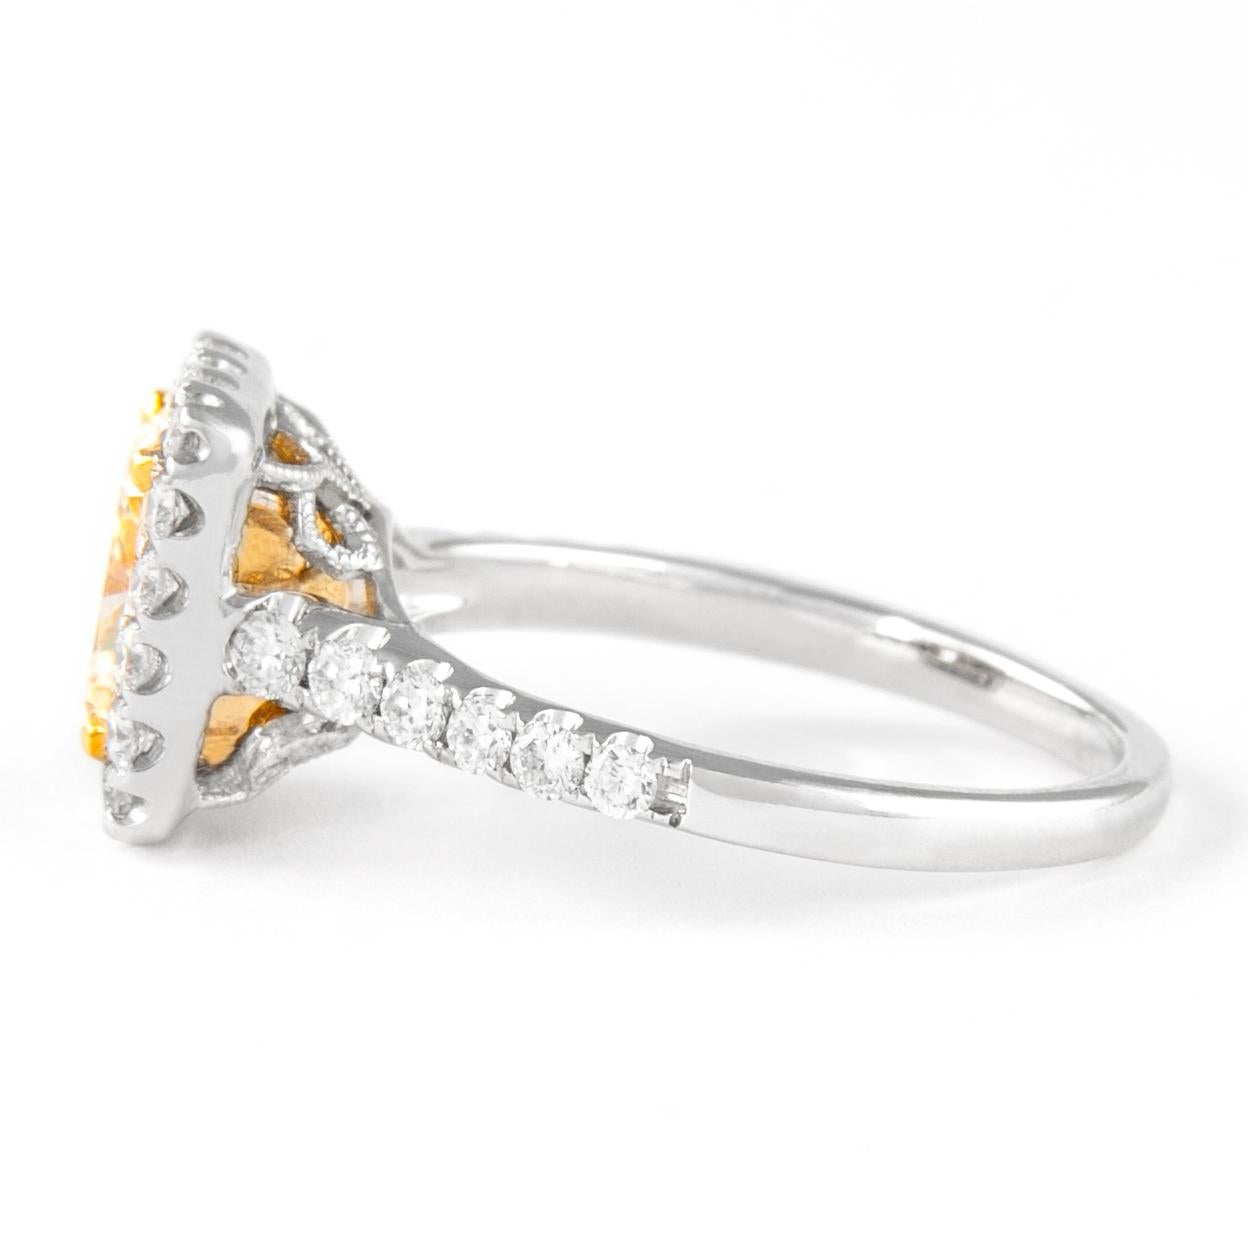 Cushion Cut Alexander 2.21ctt Fancy Yellow VS1 Cushion Diamond with Halo Ring 18k Two Tone For Sale